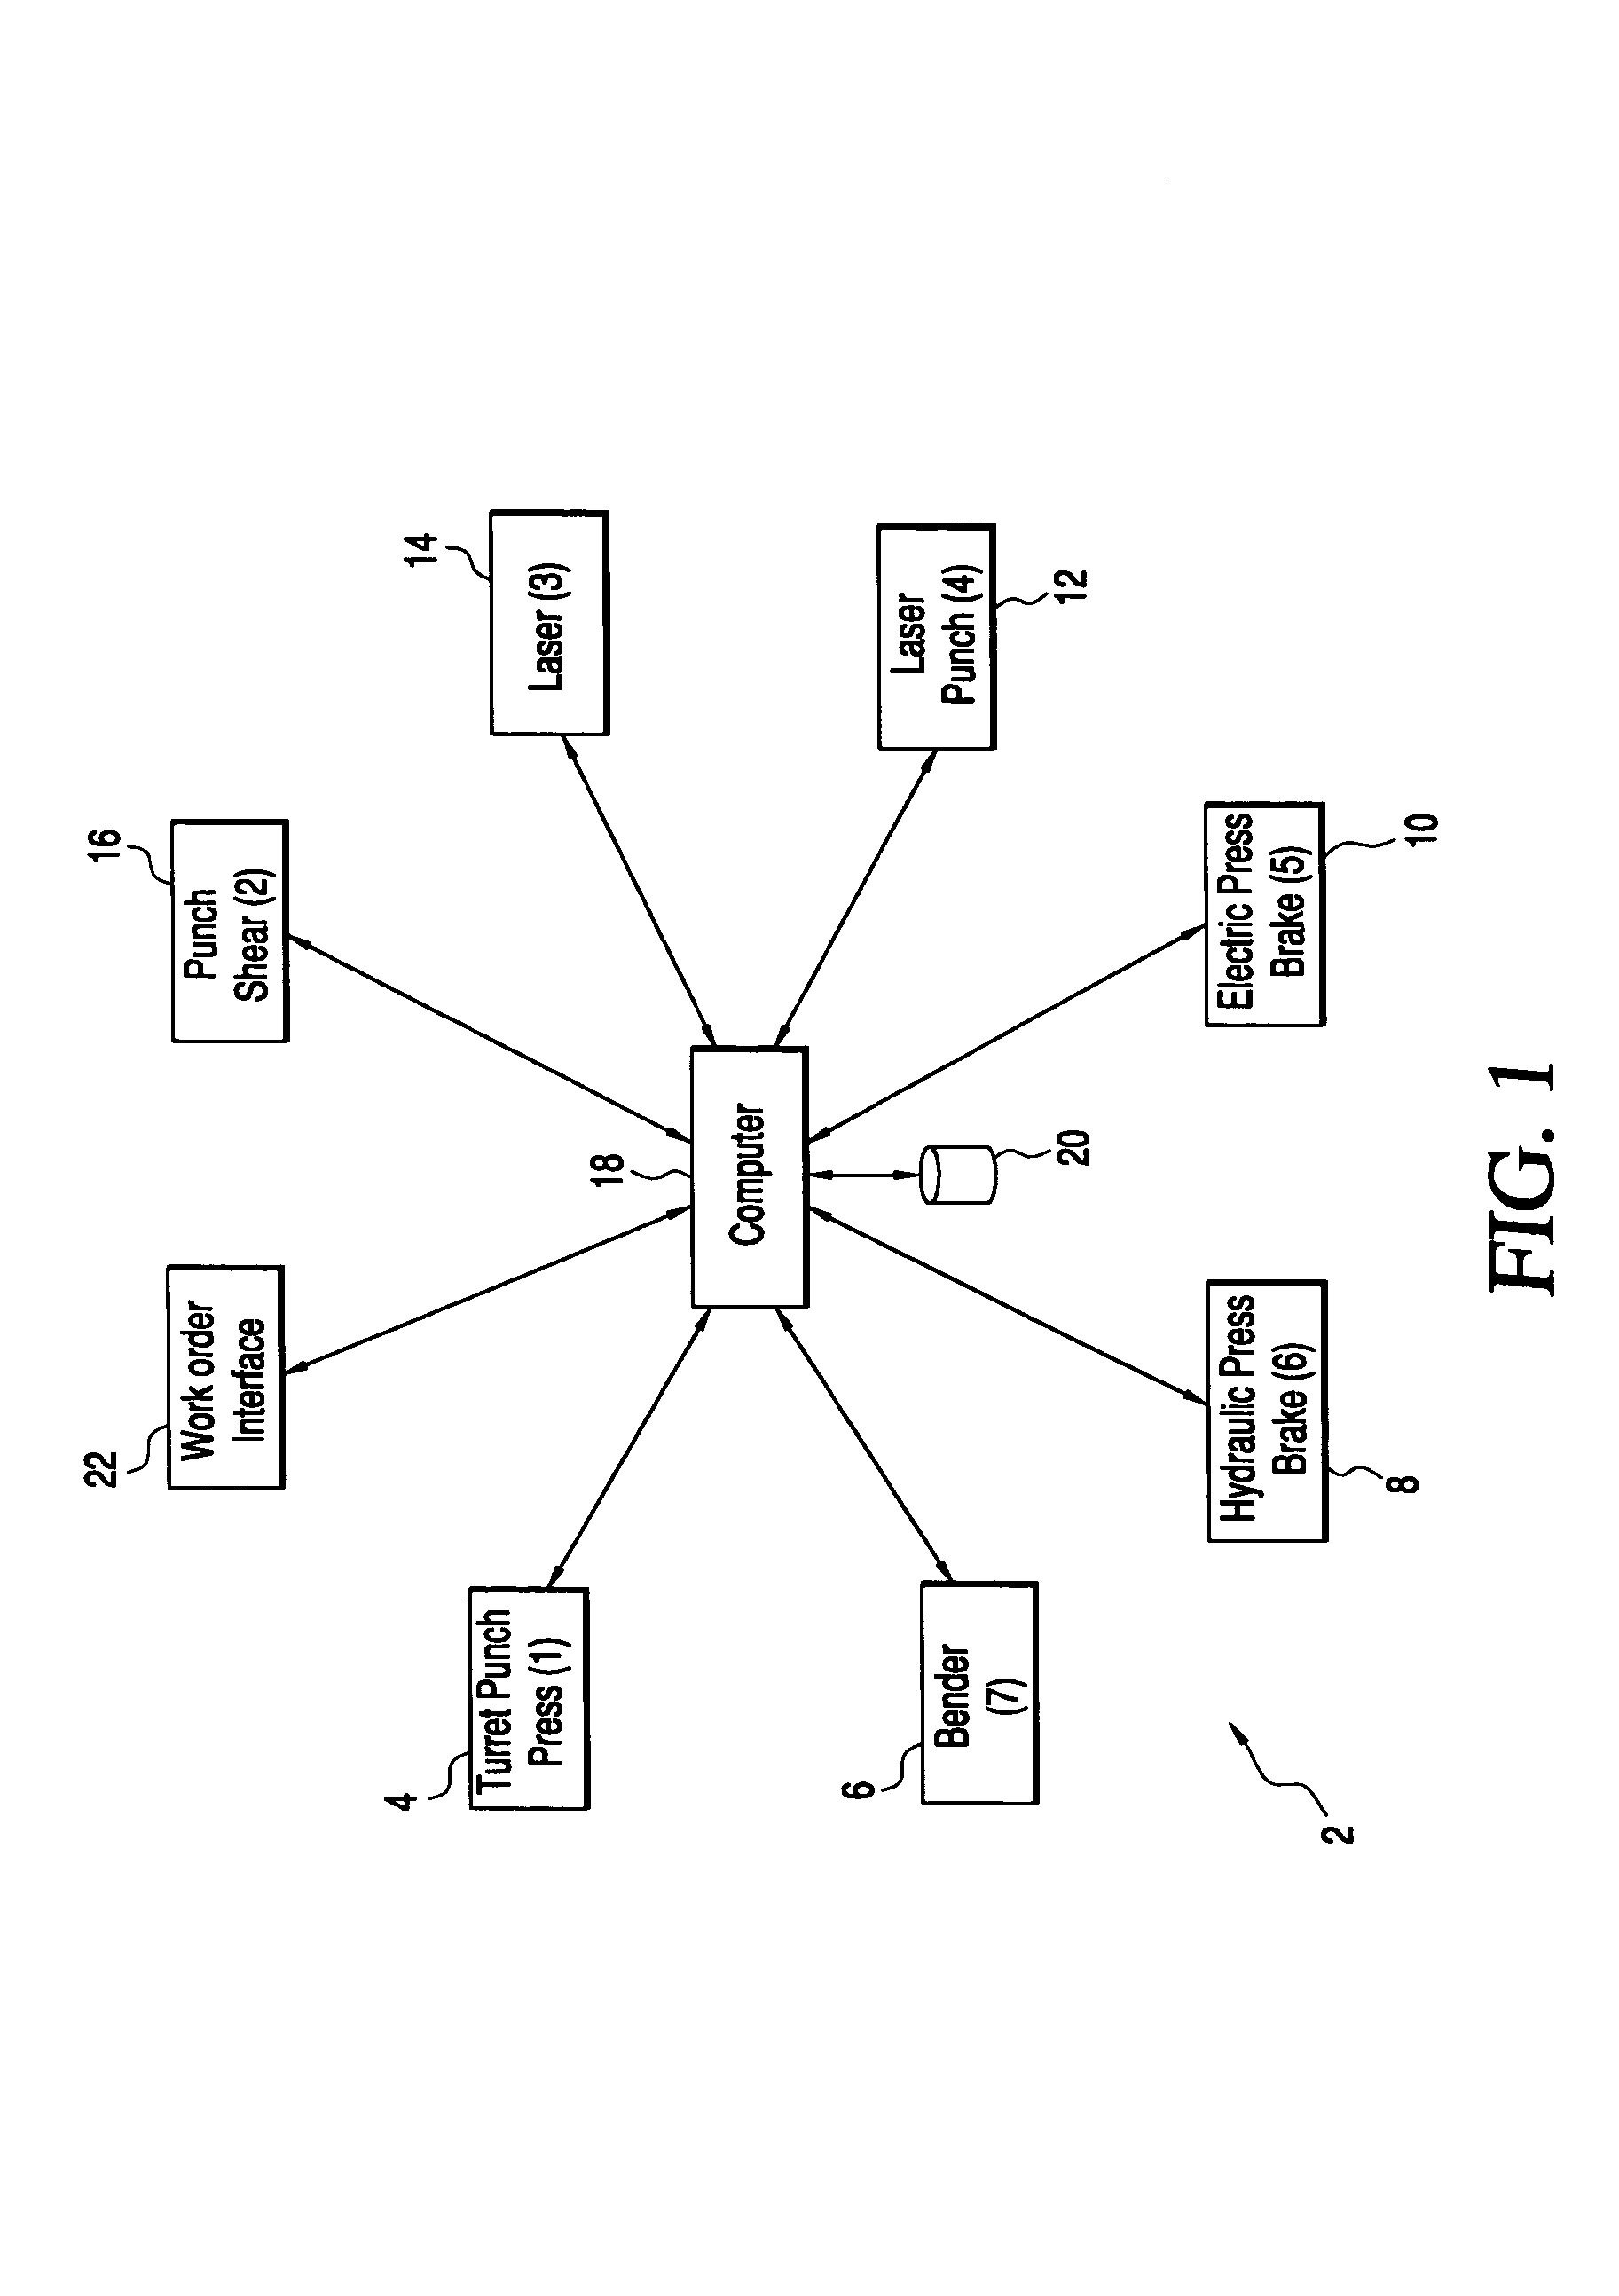 Flexible distributed manufacturing method and system therefor